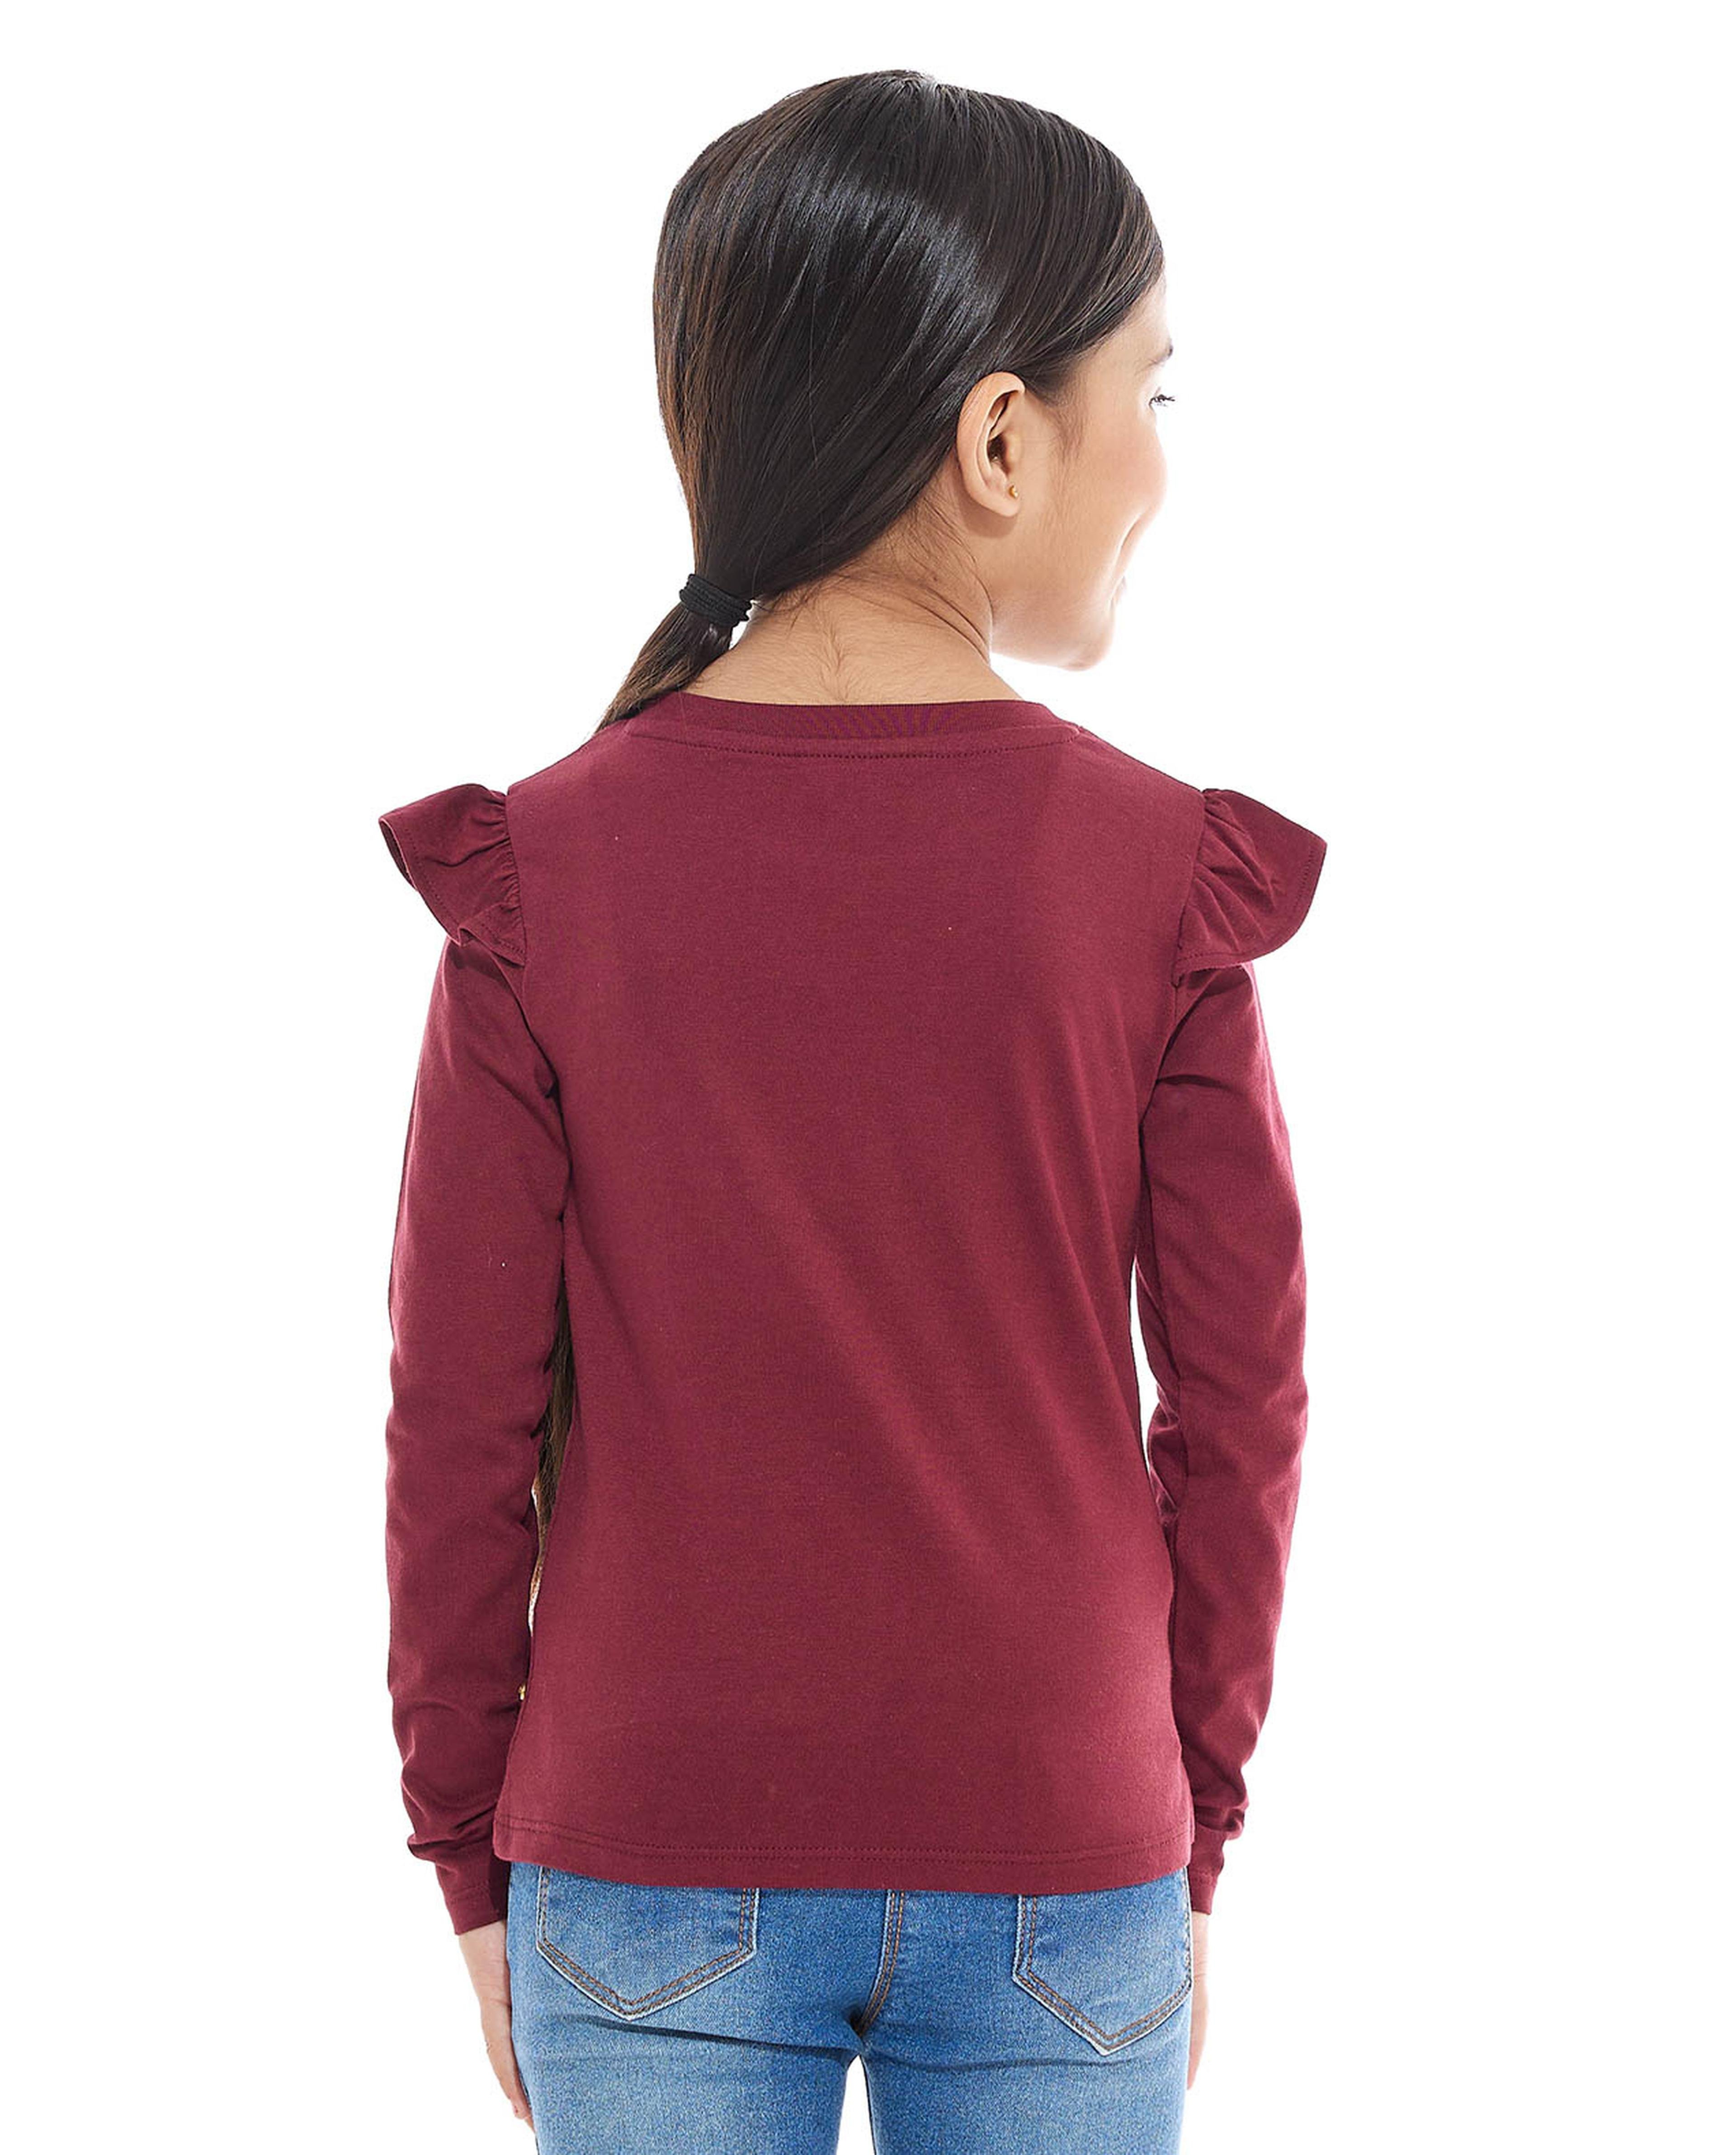 Applique Detail Top with Crew Neck and Long Sleeves